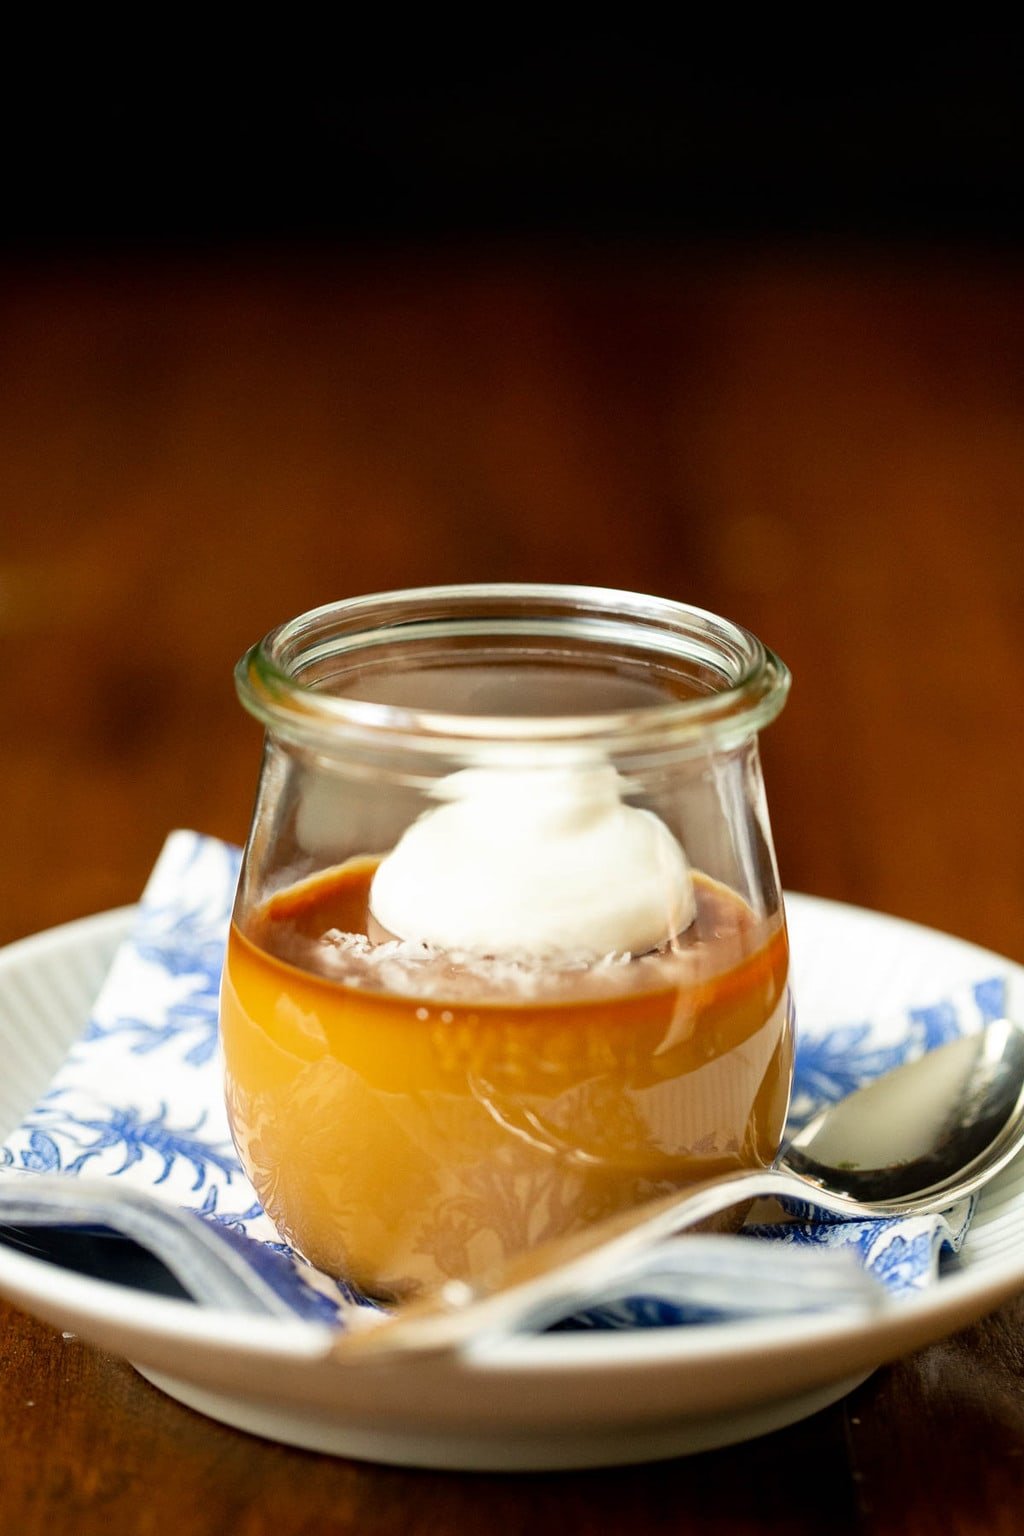 Vertical closeup photo of Butterscotch Pots de Crème in a glass Weck jar on a blue and white patterned napkin.